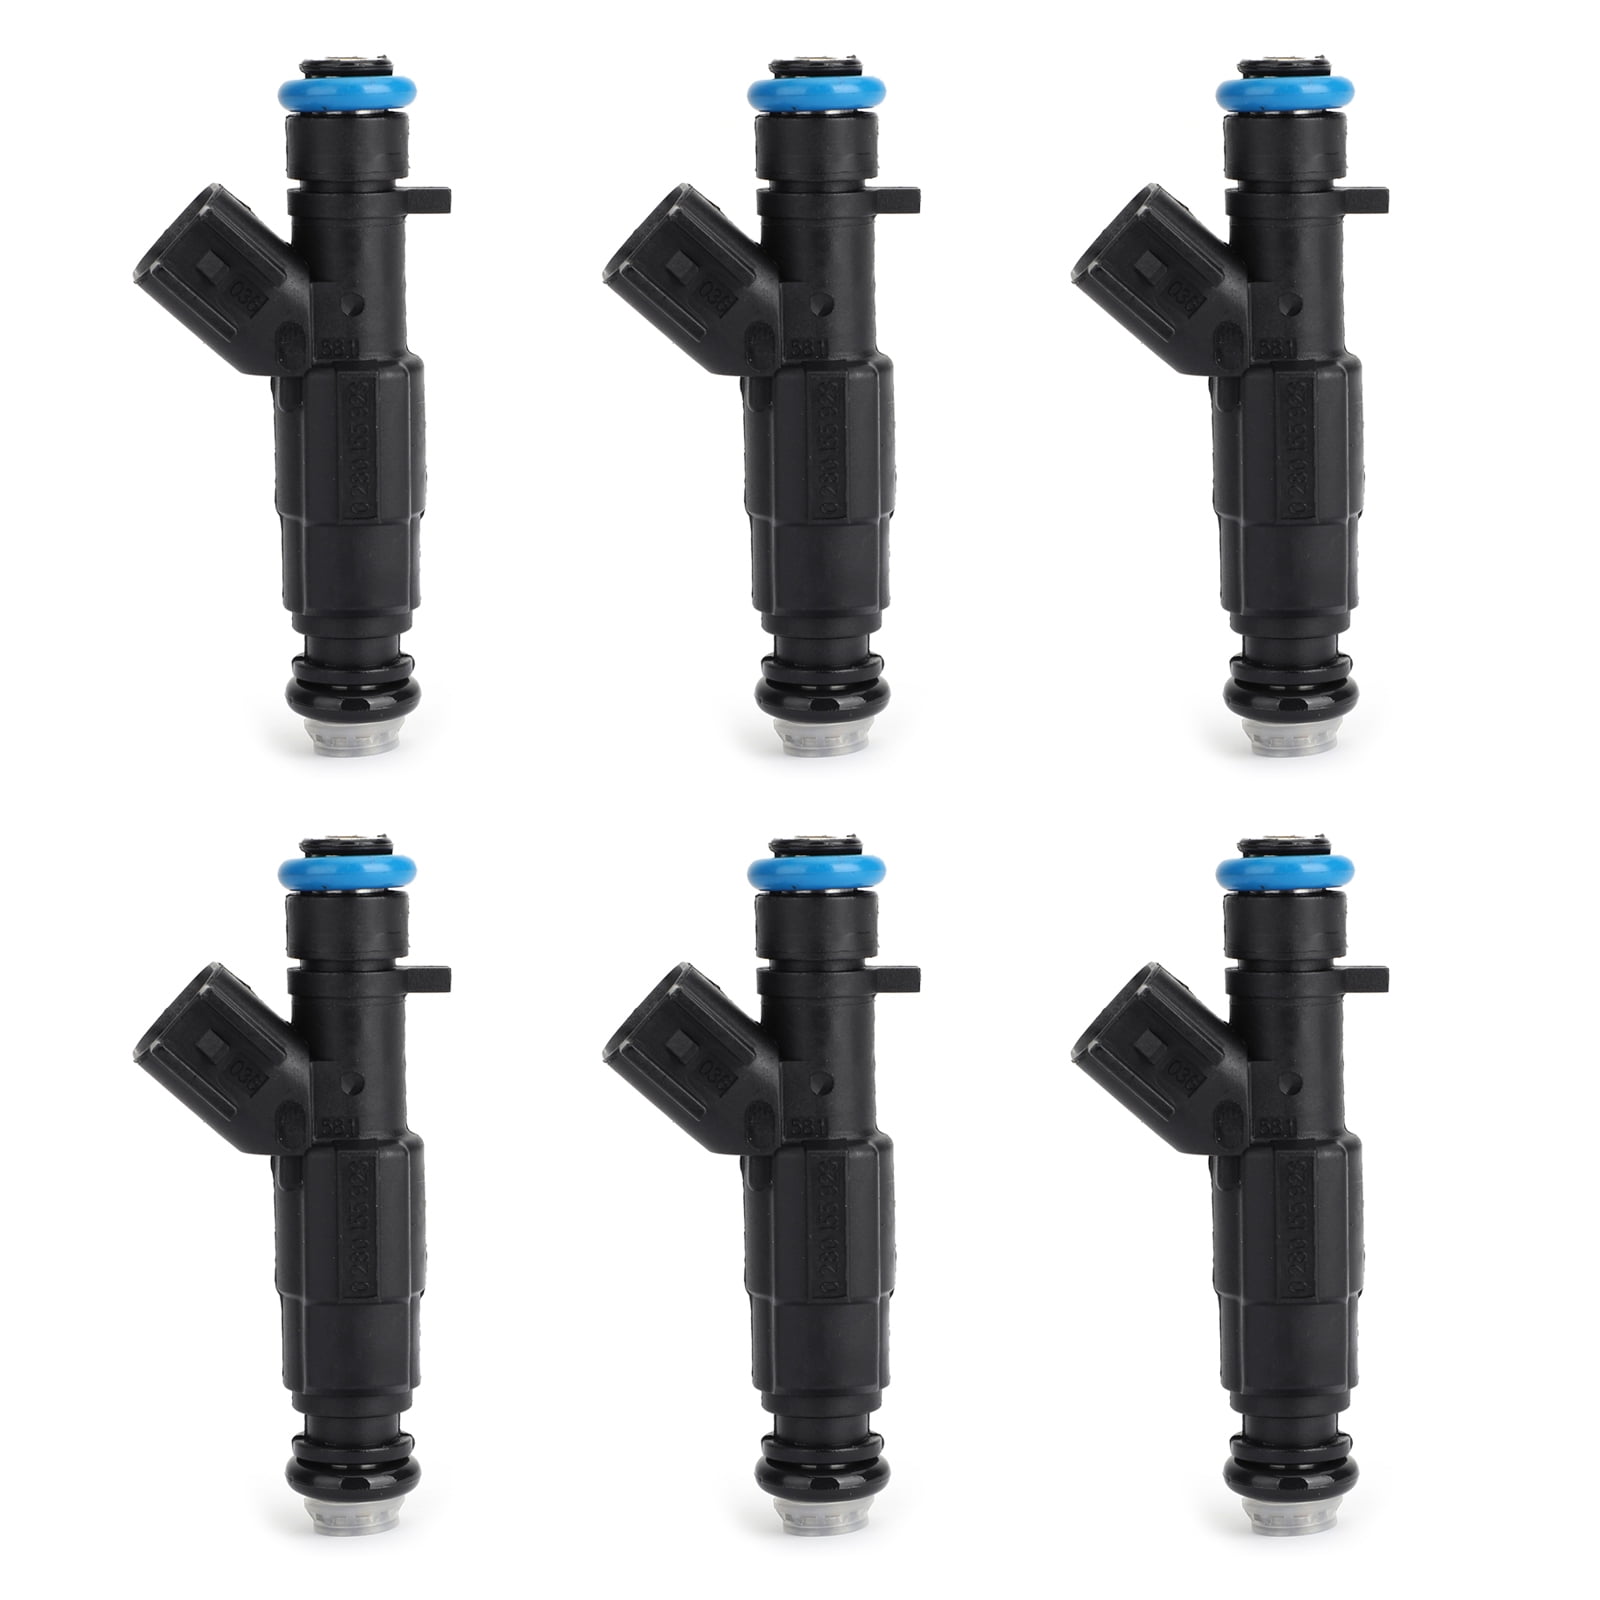 6pcs 4-Hole Upgrade Fuel Injectors For 99-04 4.0L Jeep Cherokee OEM 0280155784 